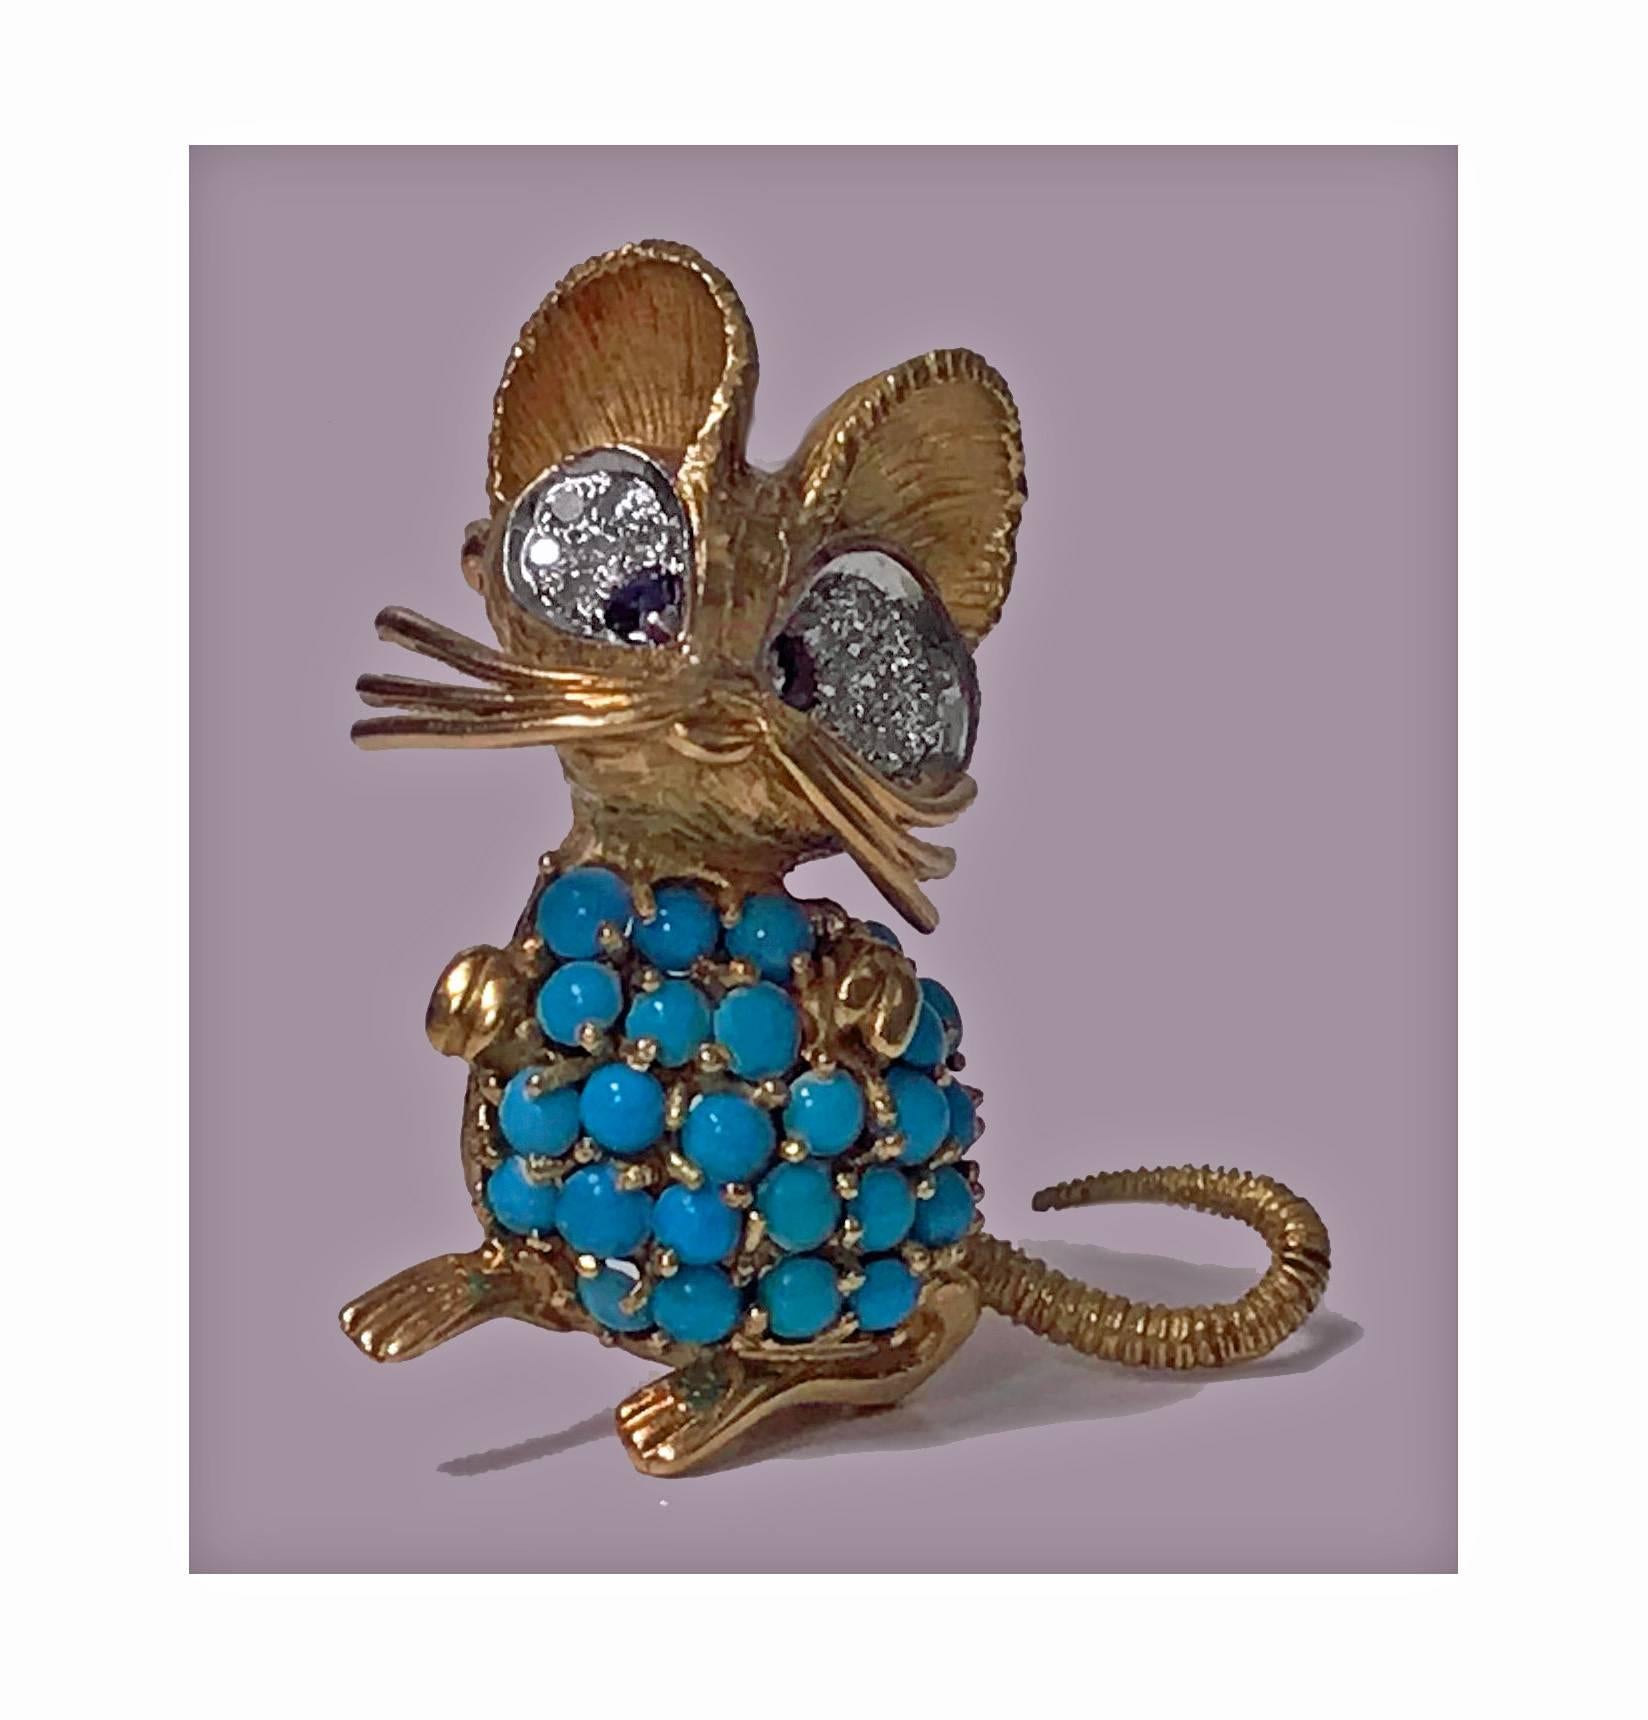 1970’s whimsical Mouse Brooch Pin 18K Diamond, Turquoise and Sapphire. The body with 28 small cabochon turquoise, the eyes white gold set with 2 small round blue sapphire and a total of thirteen single cut diamonds, ears, whiskers, tail and feet all